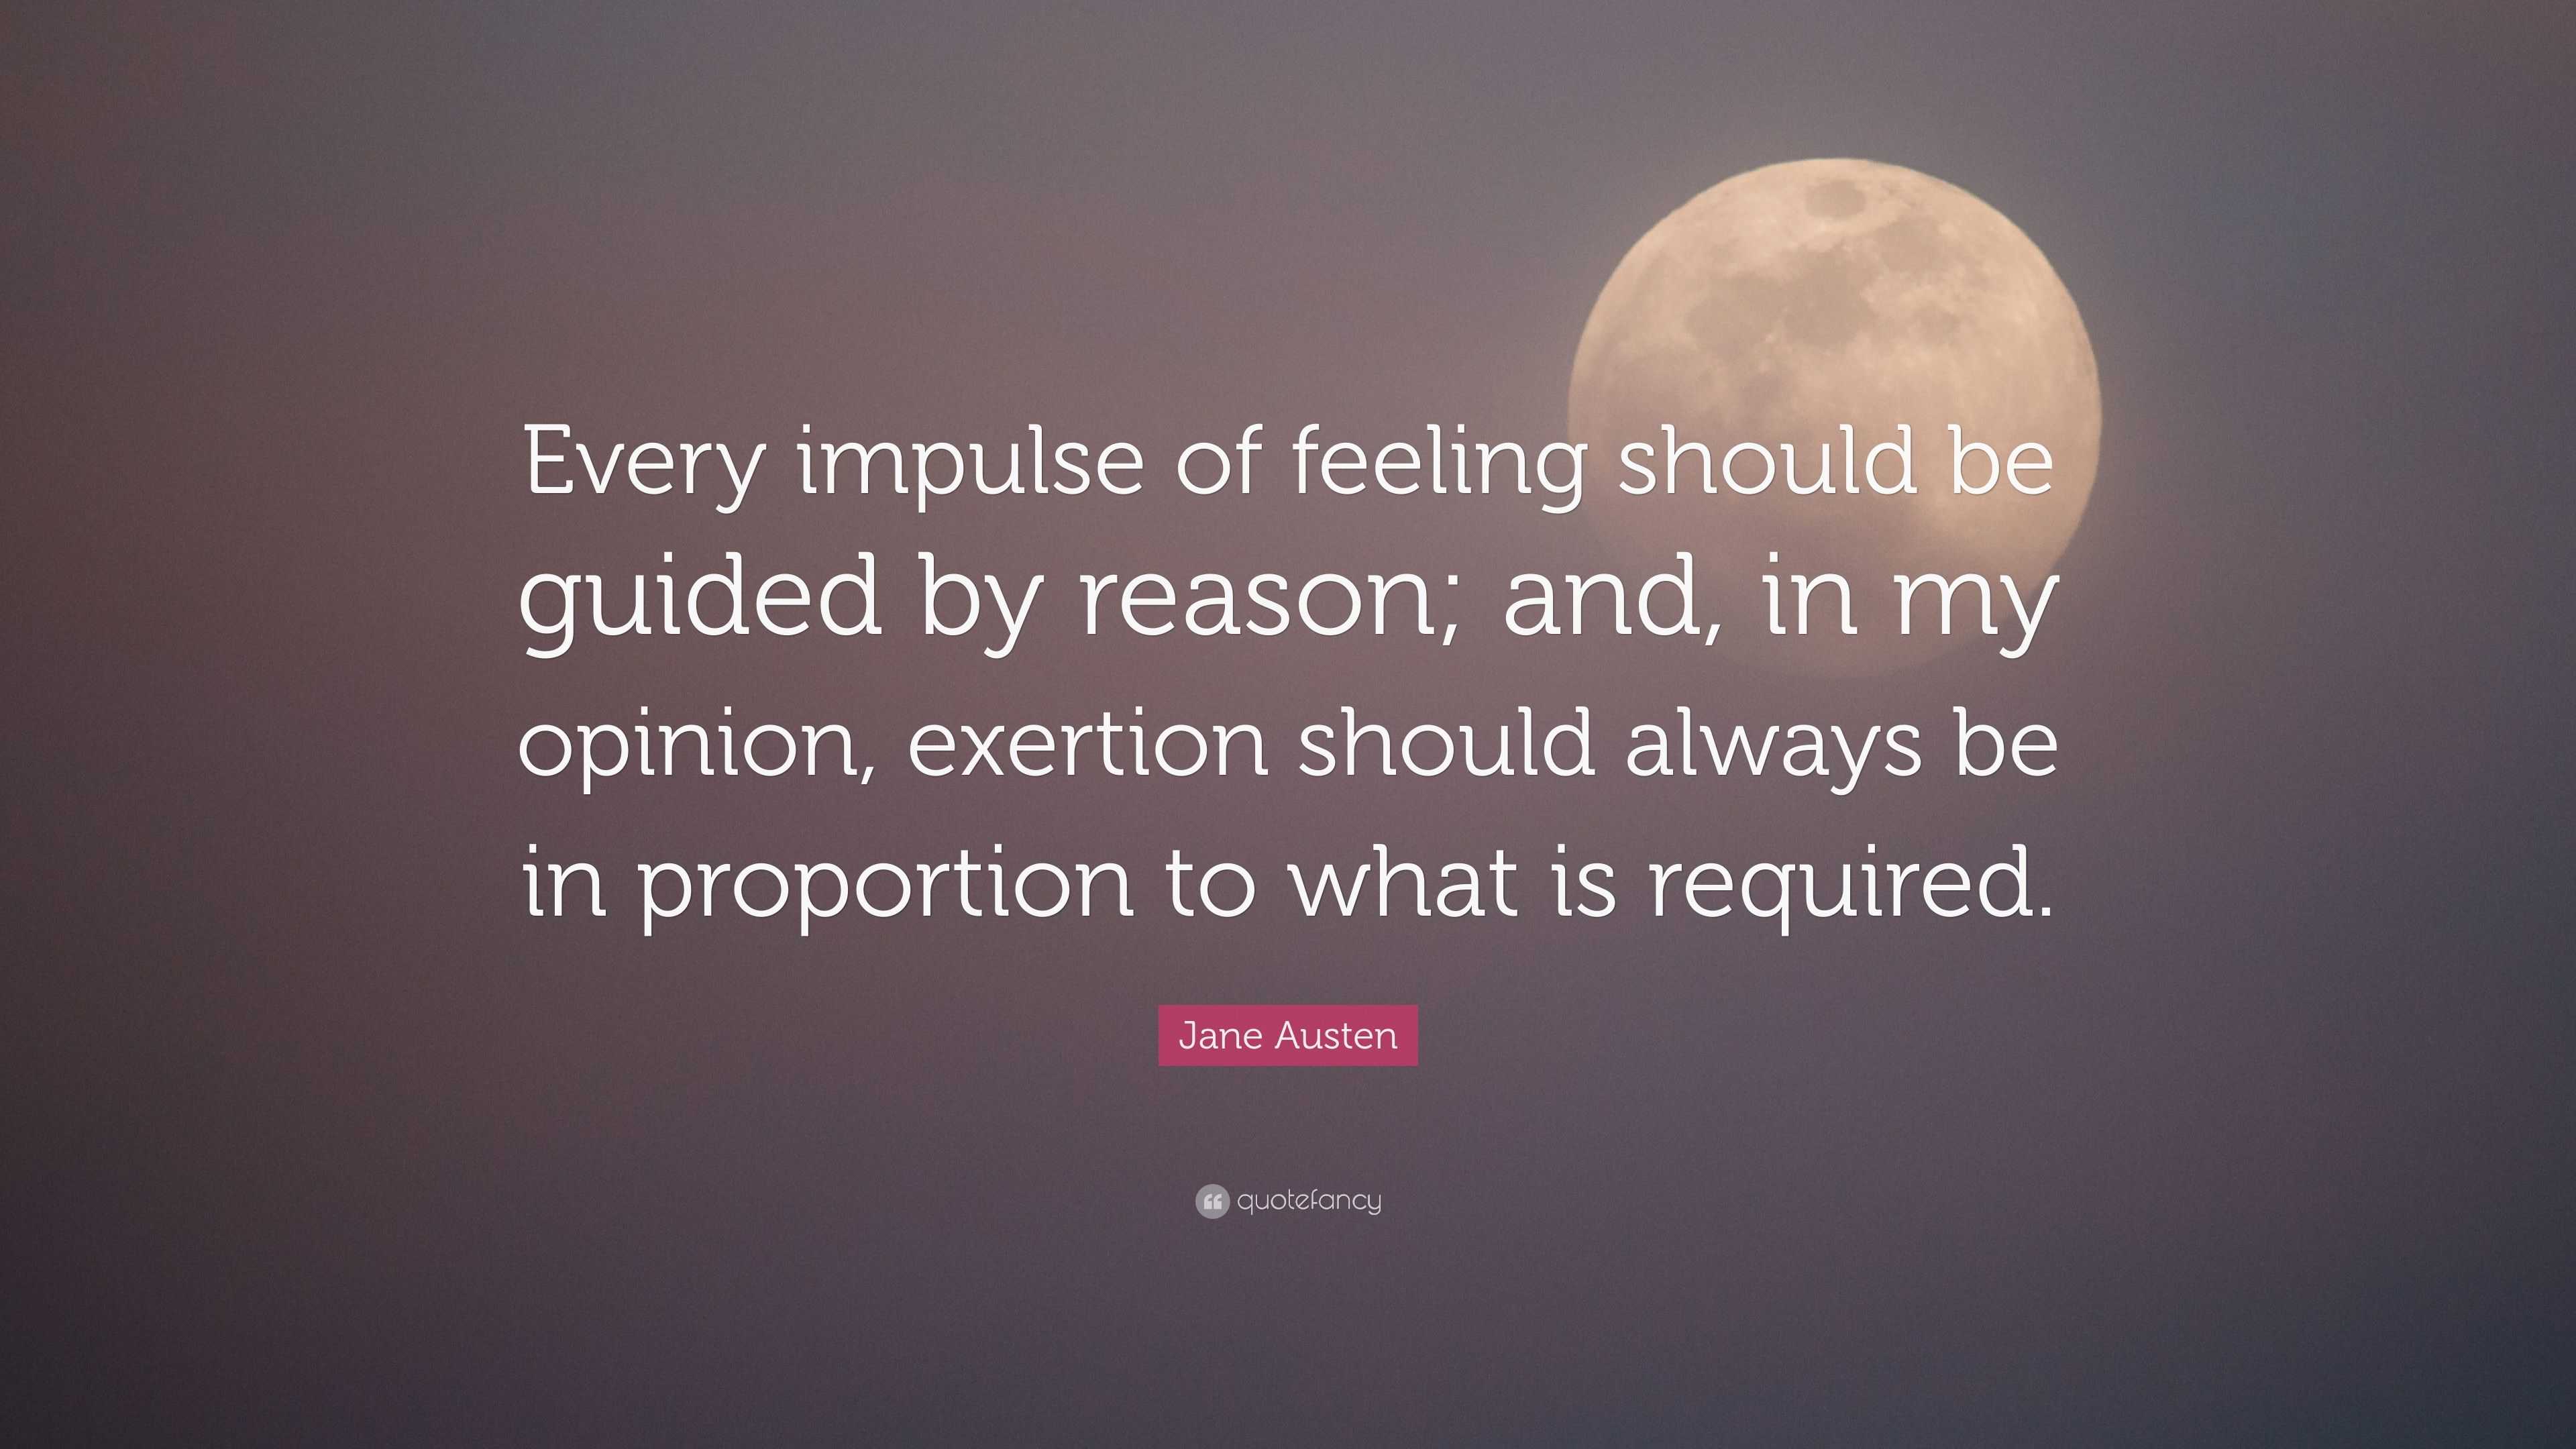 Jane Austen Quote: “Every impulse of feeling should be guided by reason ...